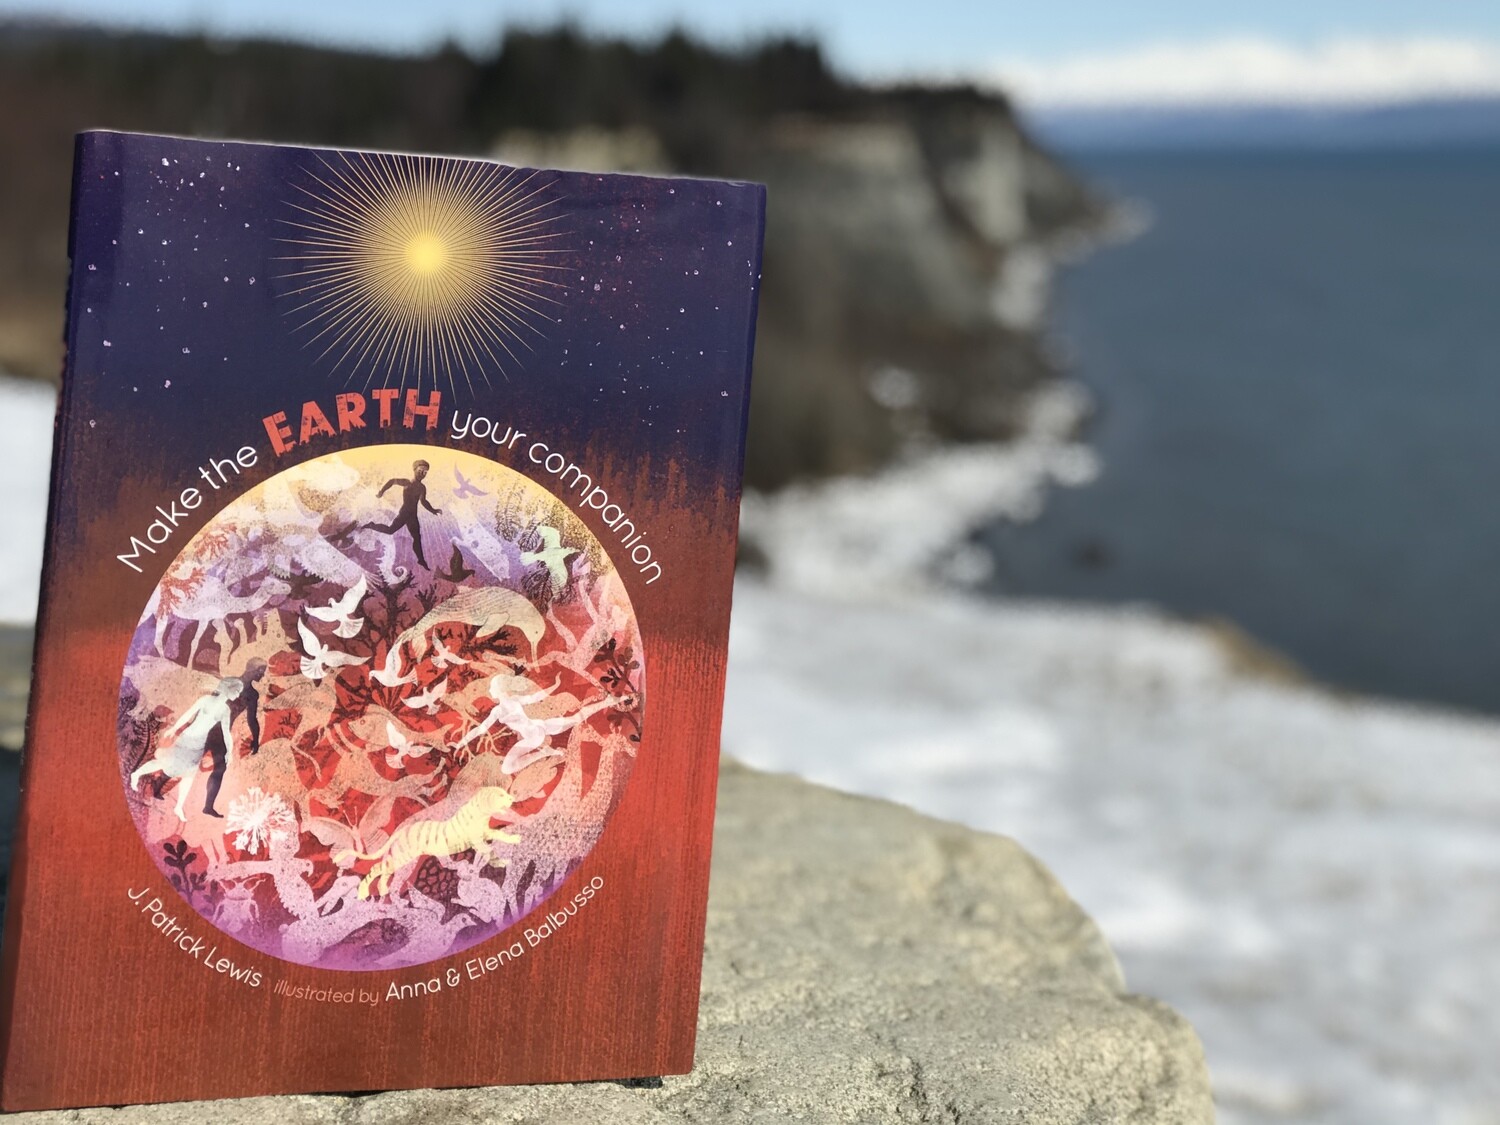 Make the Earth Your Companion (Hard cover)